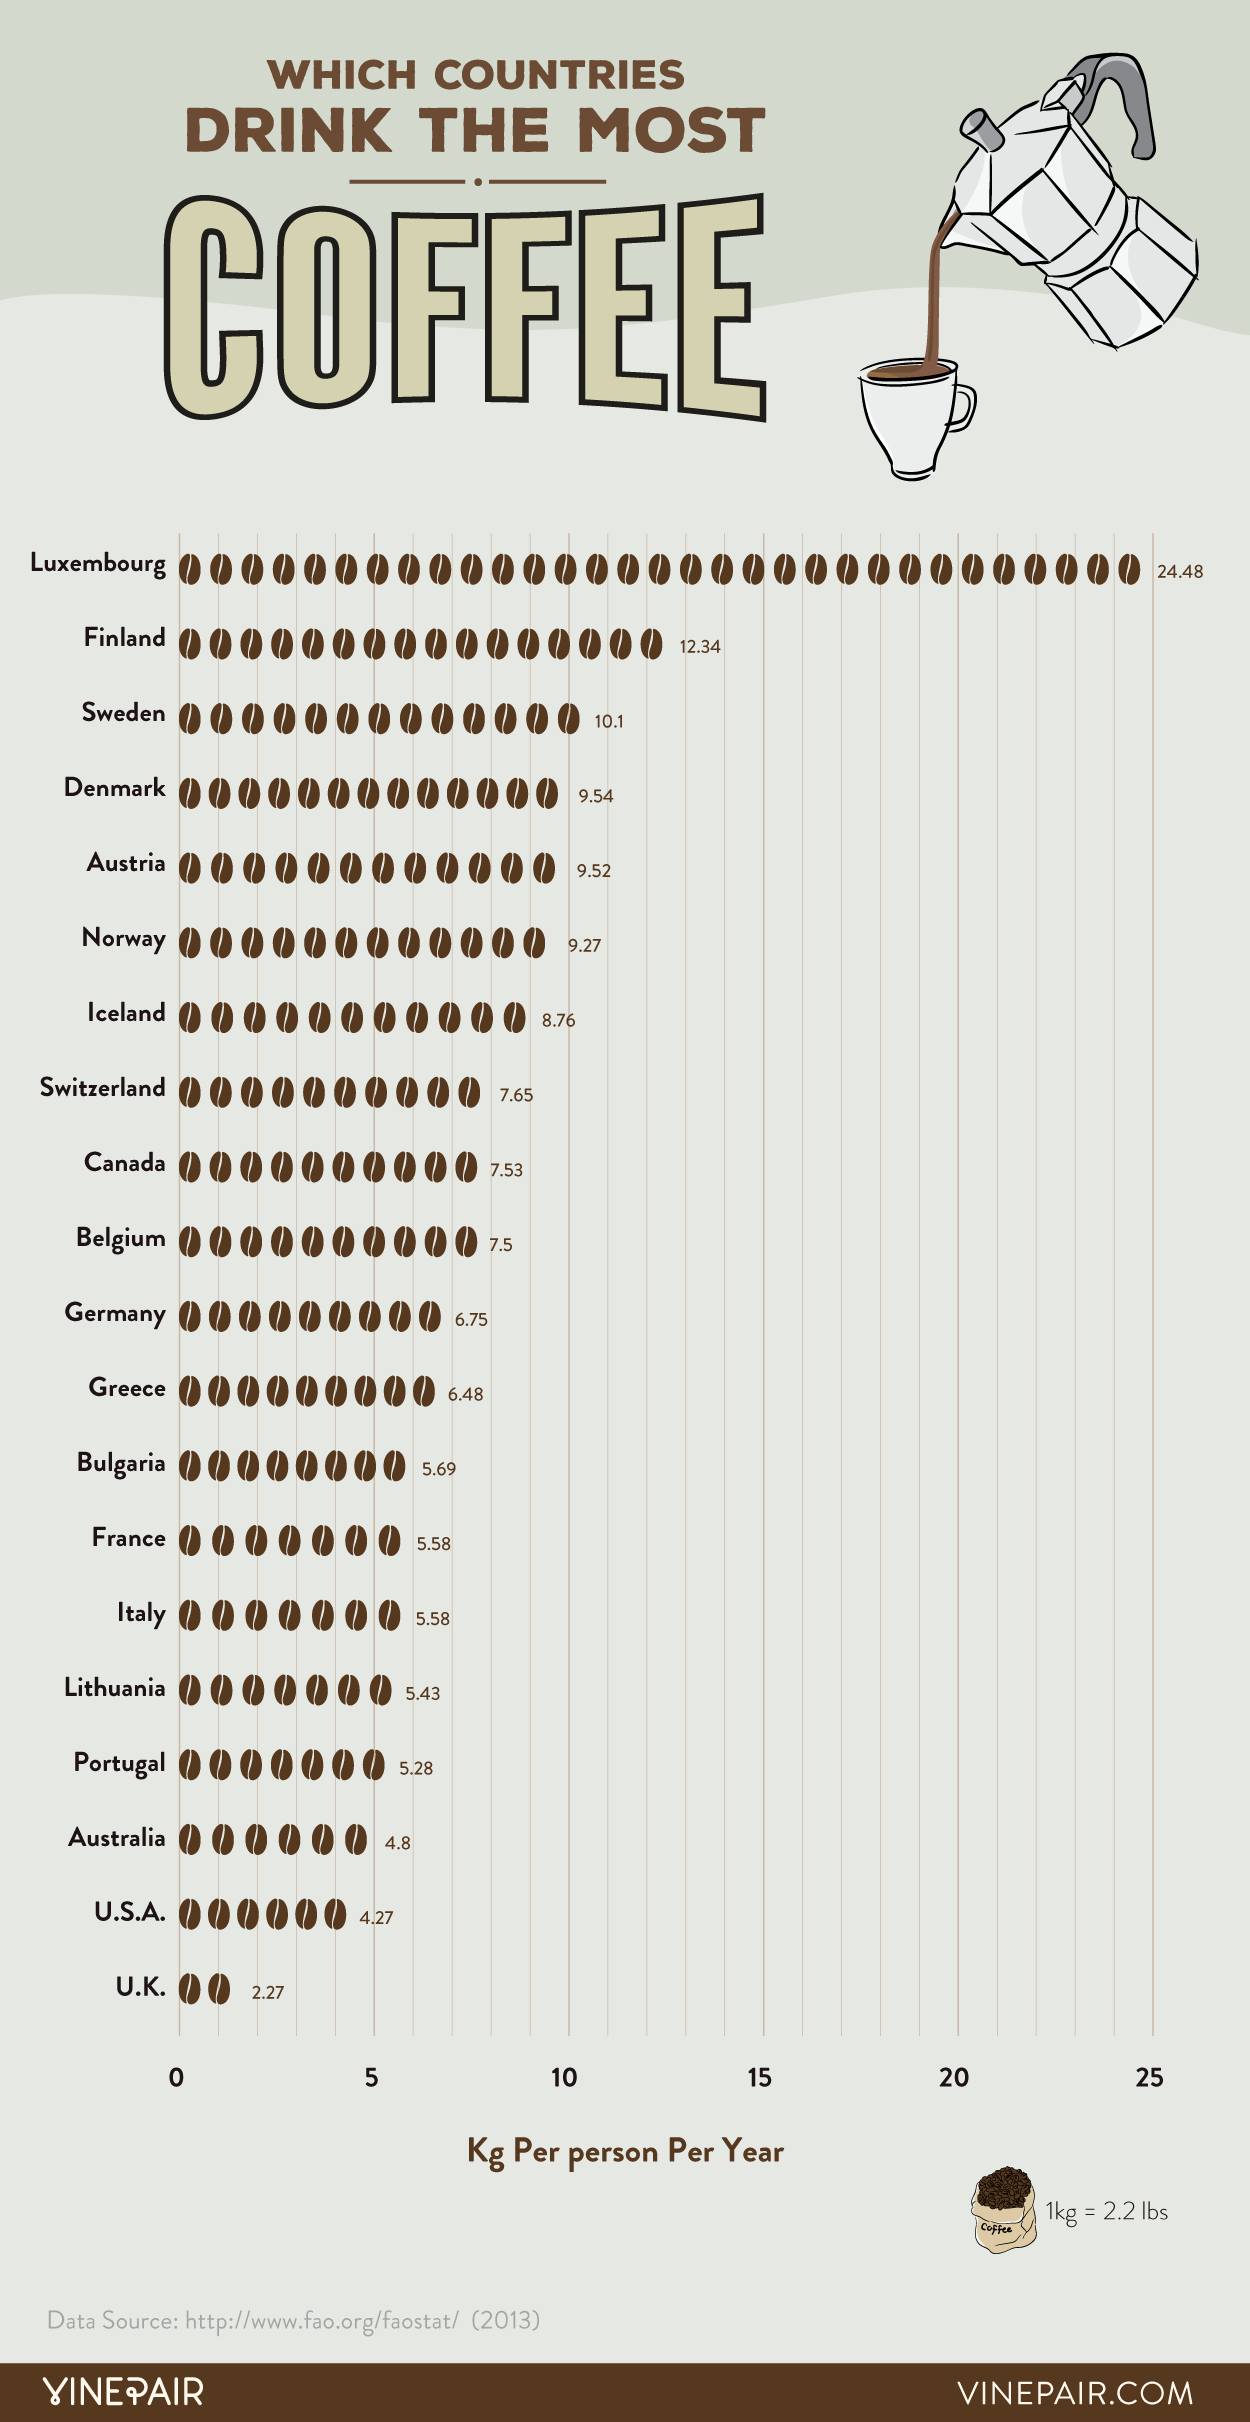 Who Drinks the Most Coffee?